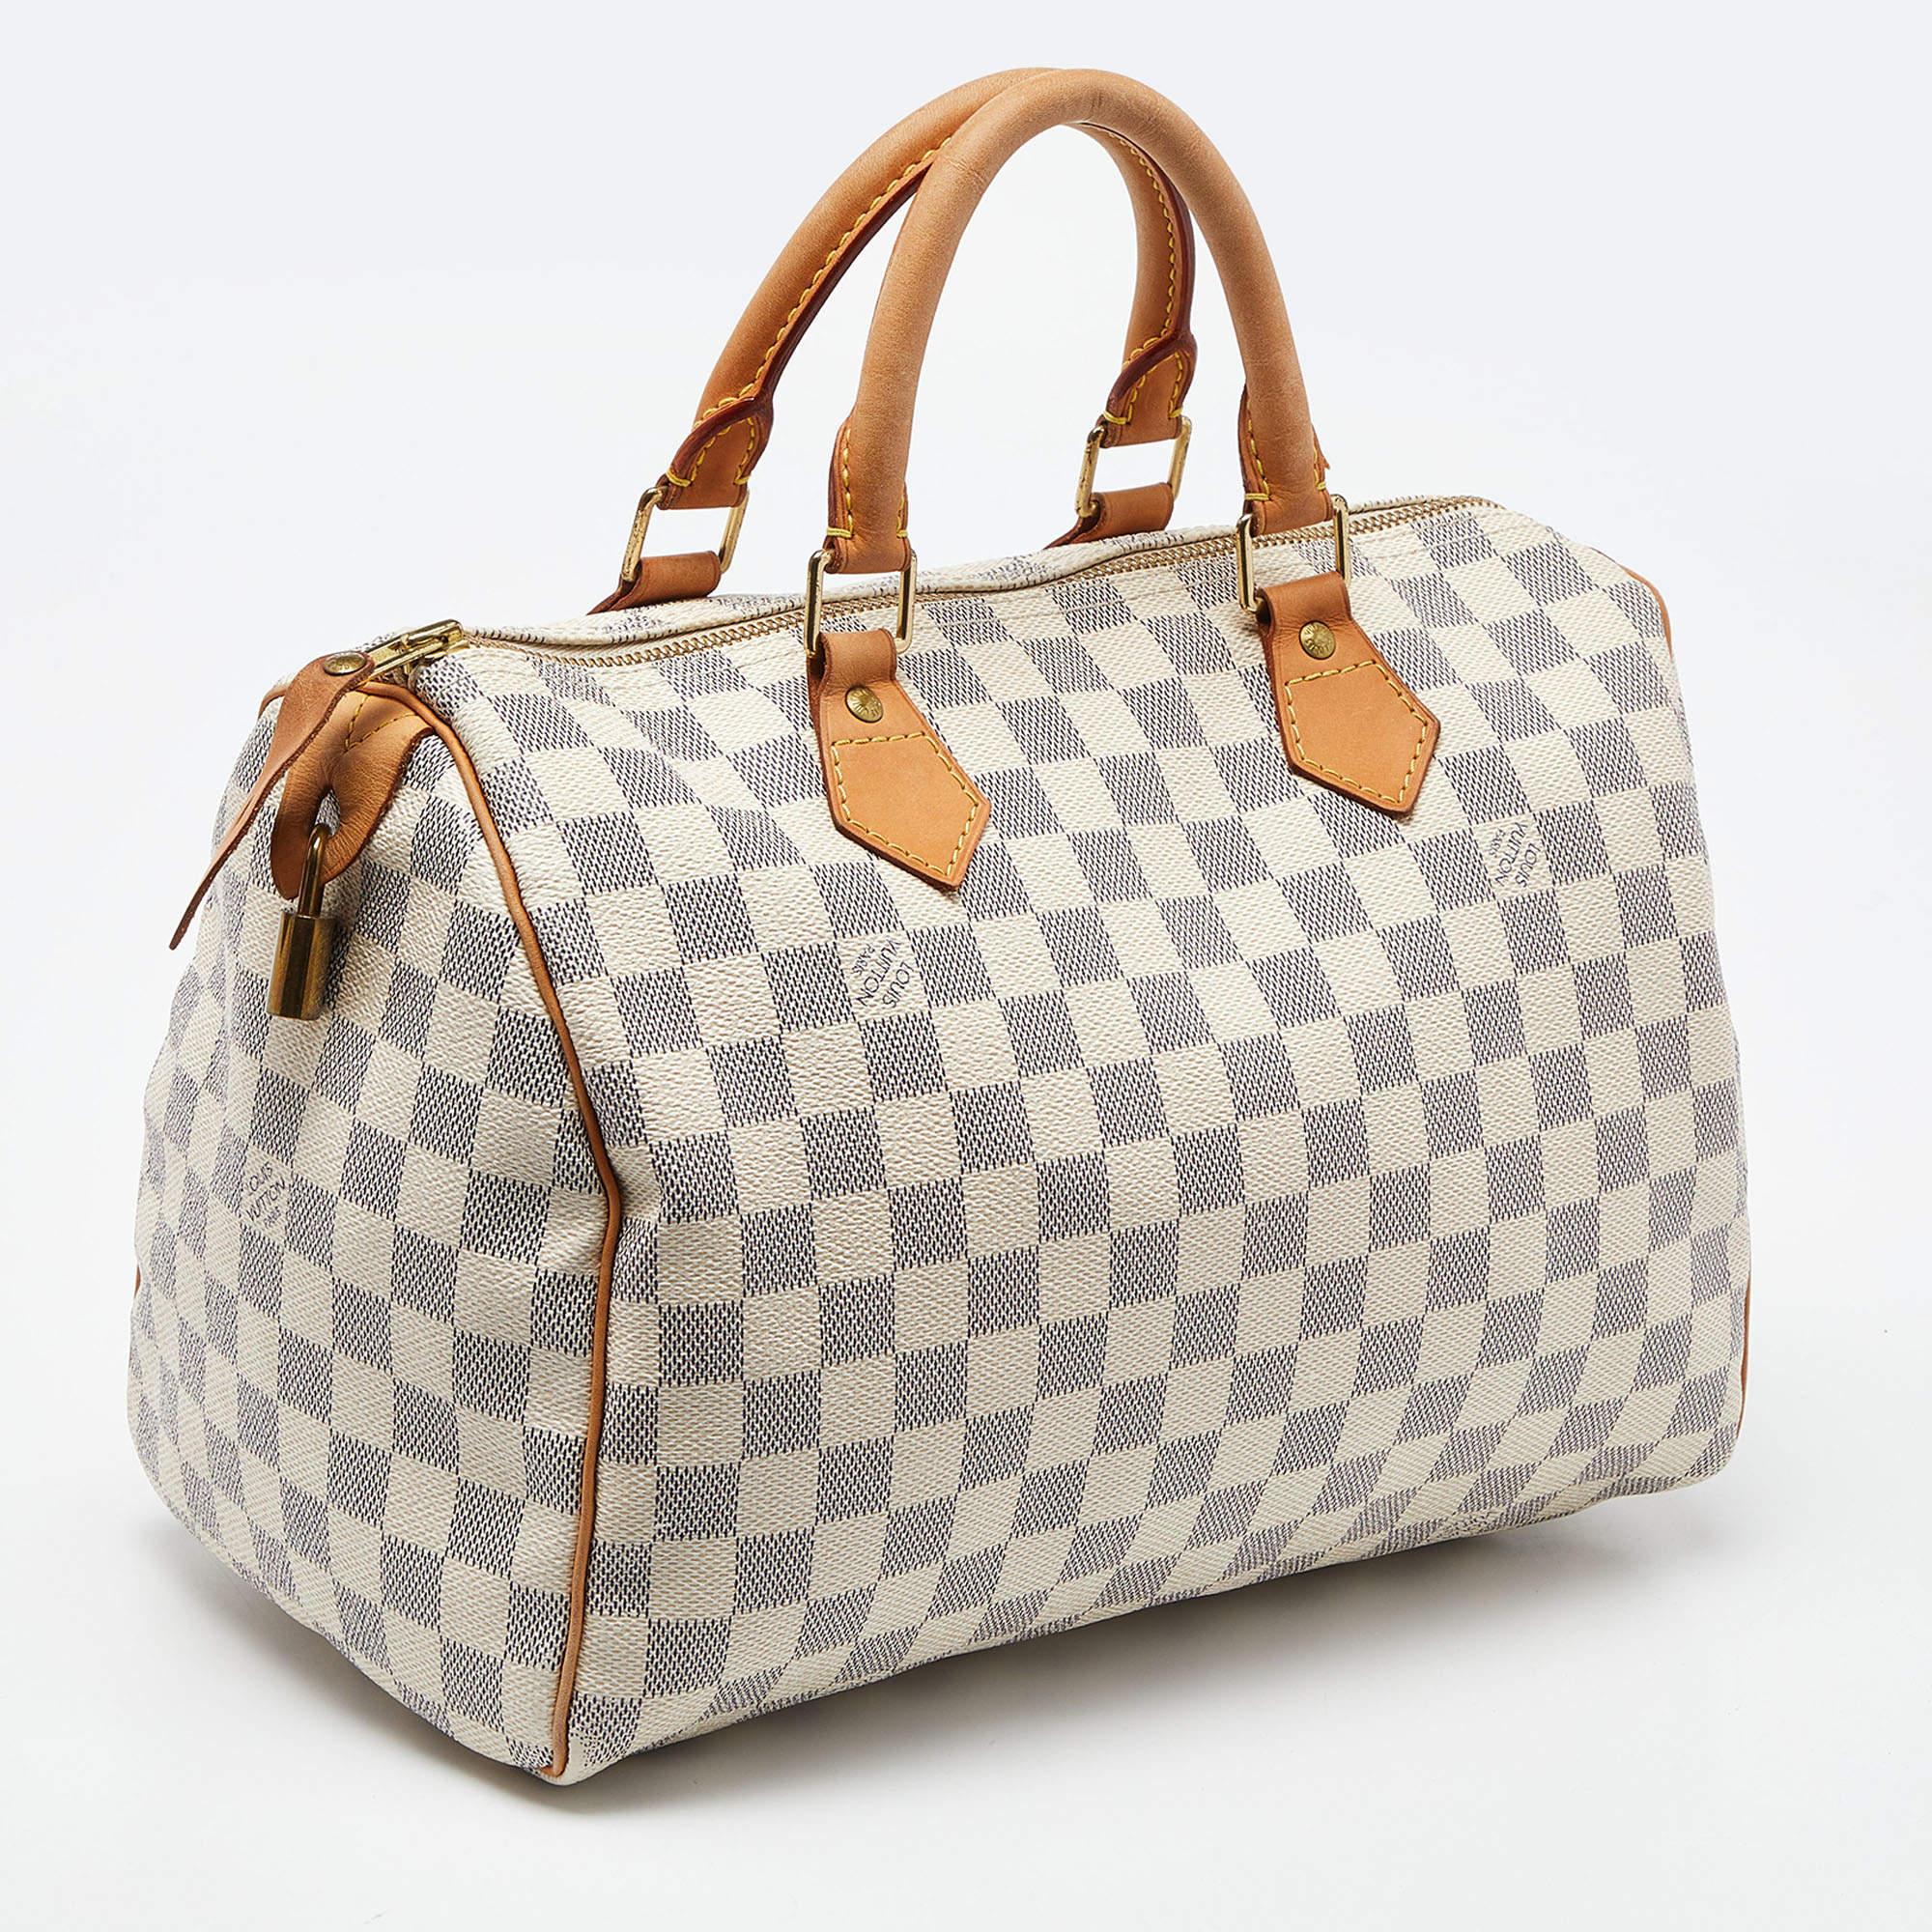 Louis Vuitton's handbags are popular owing to their high style and functionality. This bag, like all their designs, is durable and stylish. Exuding a fine finish, the LV Damier Azur Speedy 30 bag is designed to give a luxurious experience. The